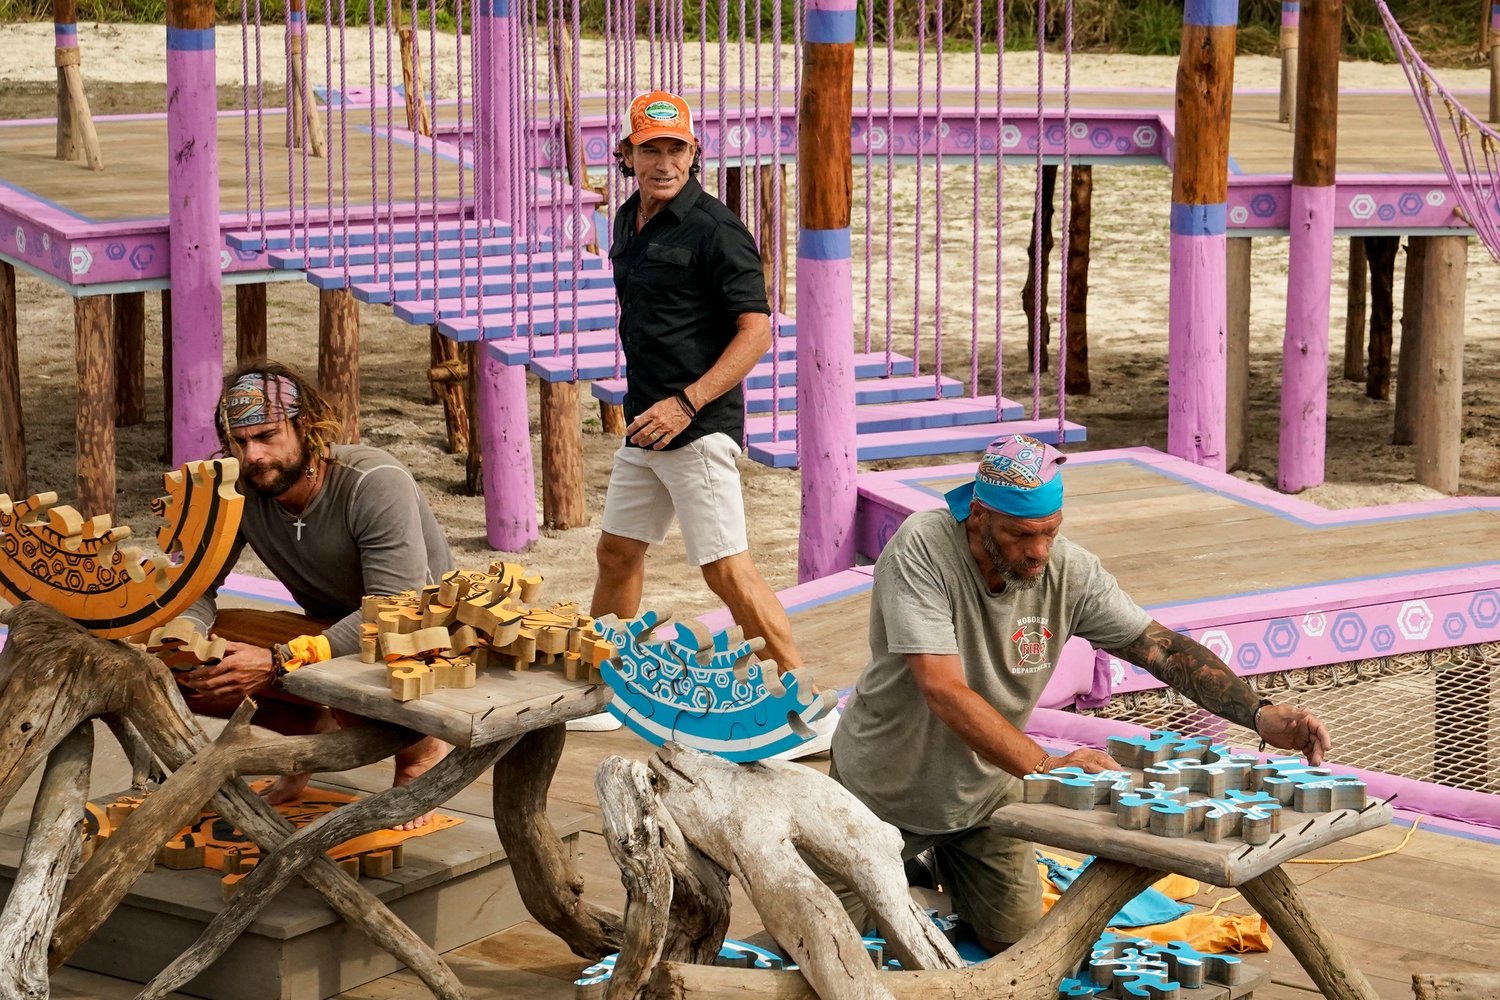 Baldwin County's Jonathan Young and castaway Mike have worked together since the merge. Will their alliance get them to the final three? Above, Young and Mike work on a large circular puzzle to win immunity.